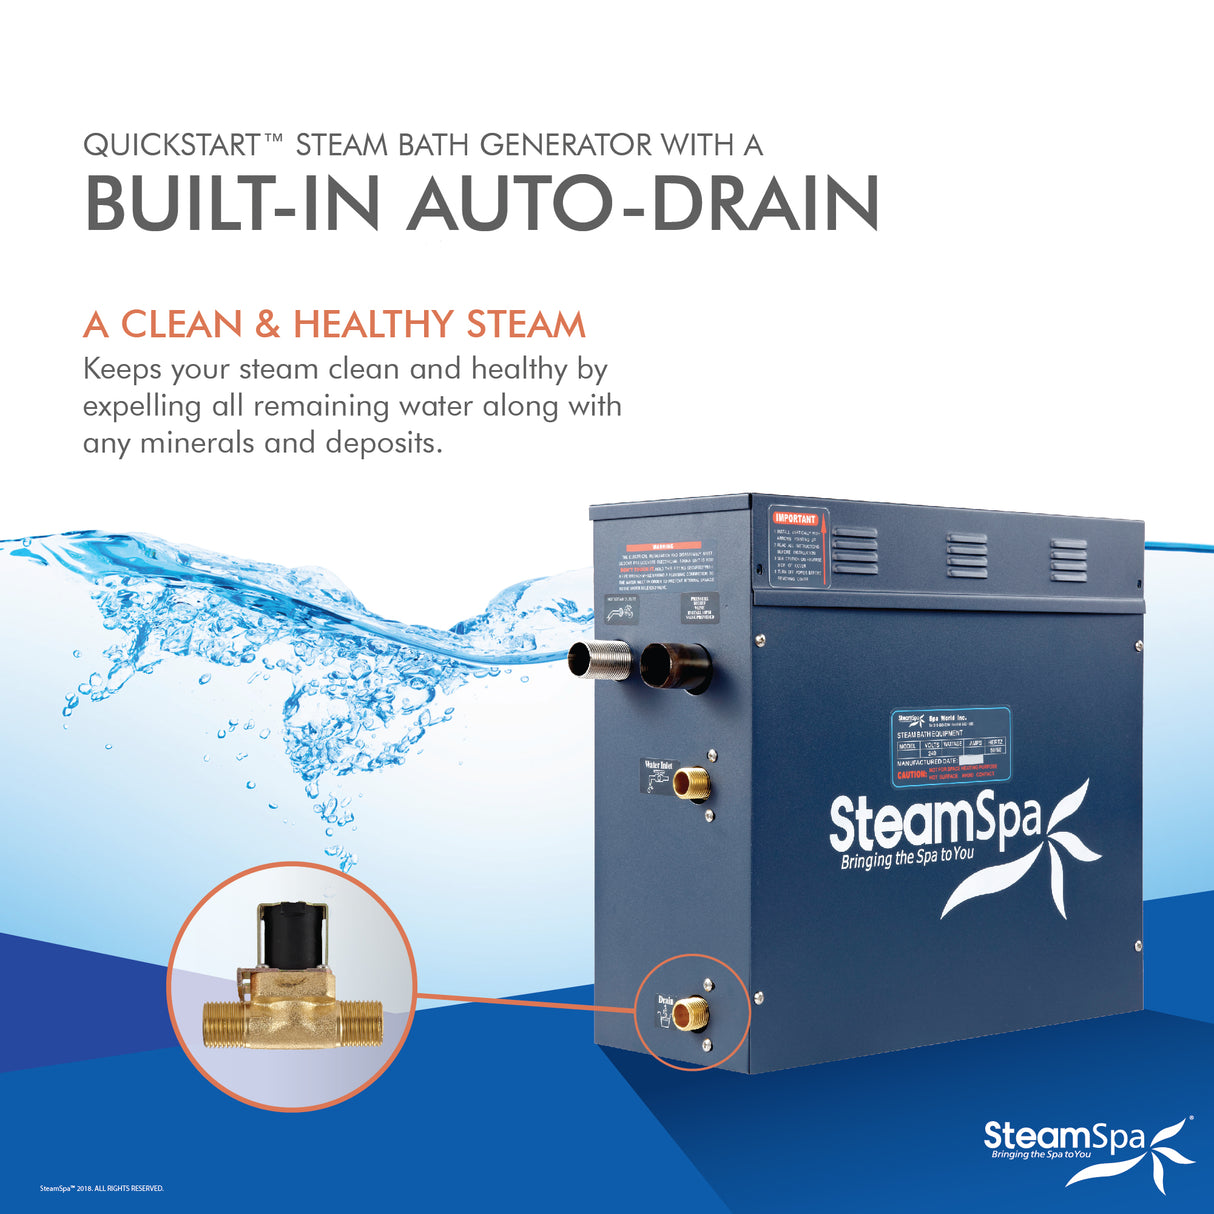 Steamspa Sentry Series 7.5KW QUICKSTART Steam Bath Generator Package in Chrome | Luxury Sauna Home Bath Steam Generator for Shower with Touch Screen, Steamhead, and Built-in Auto Drain | SNT750CH-A SNT750CH-A